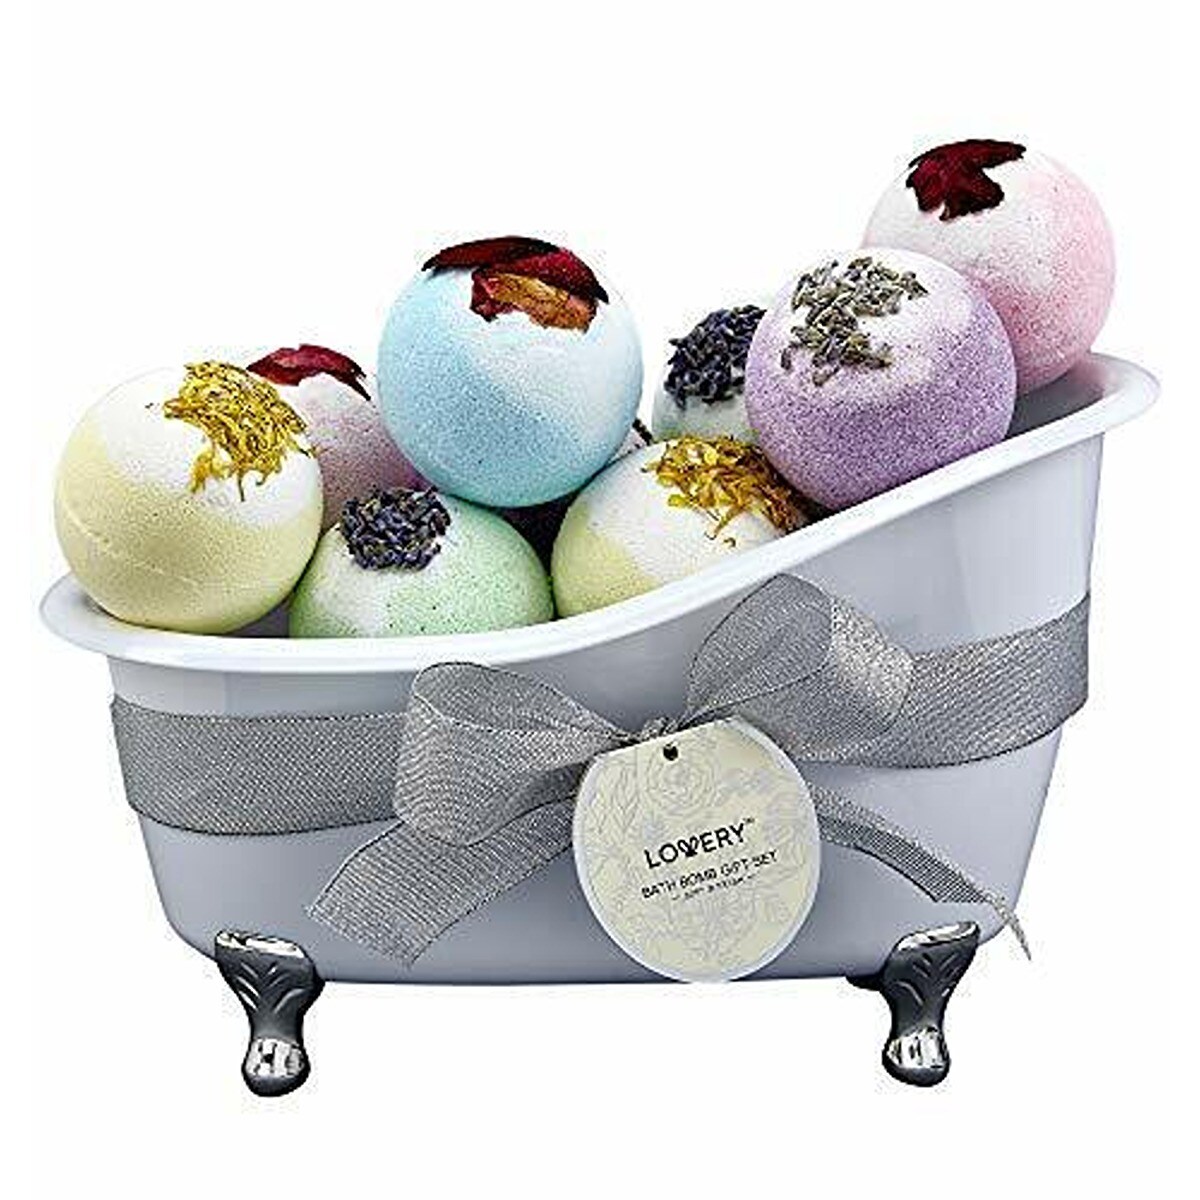 Milky Way™ Bath Bomb Ball Mold - 1.75 Inche diameter (2 pc set) for only  $1.50 at Aztec Candle & Soap Making Supplies